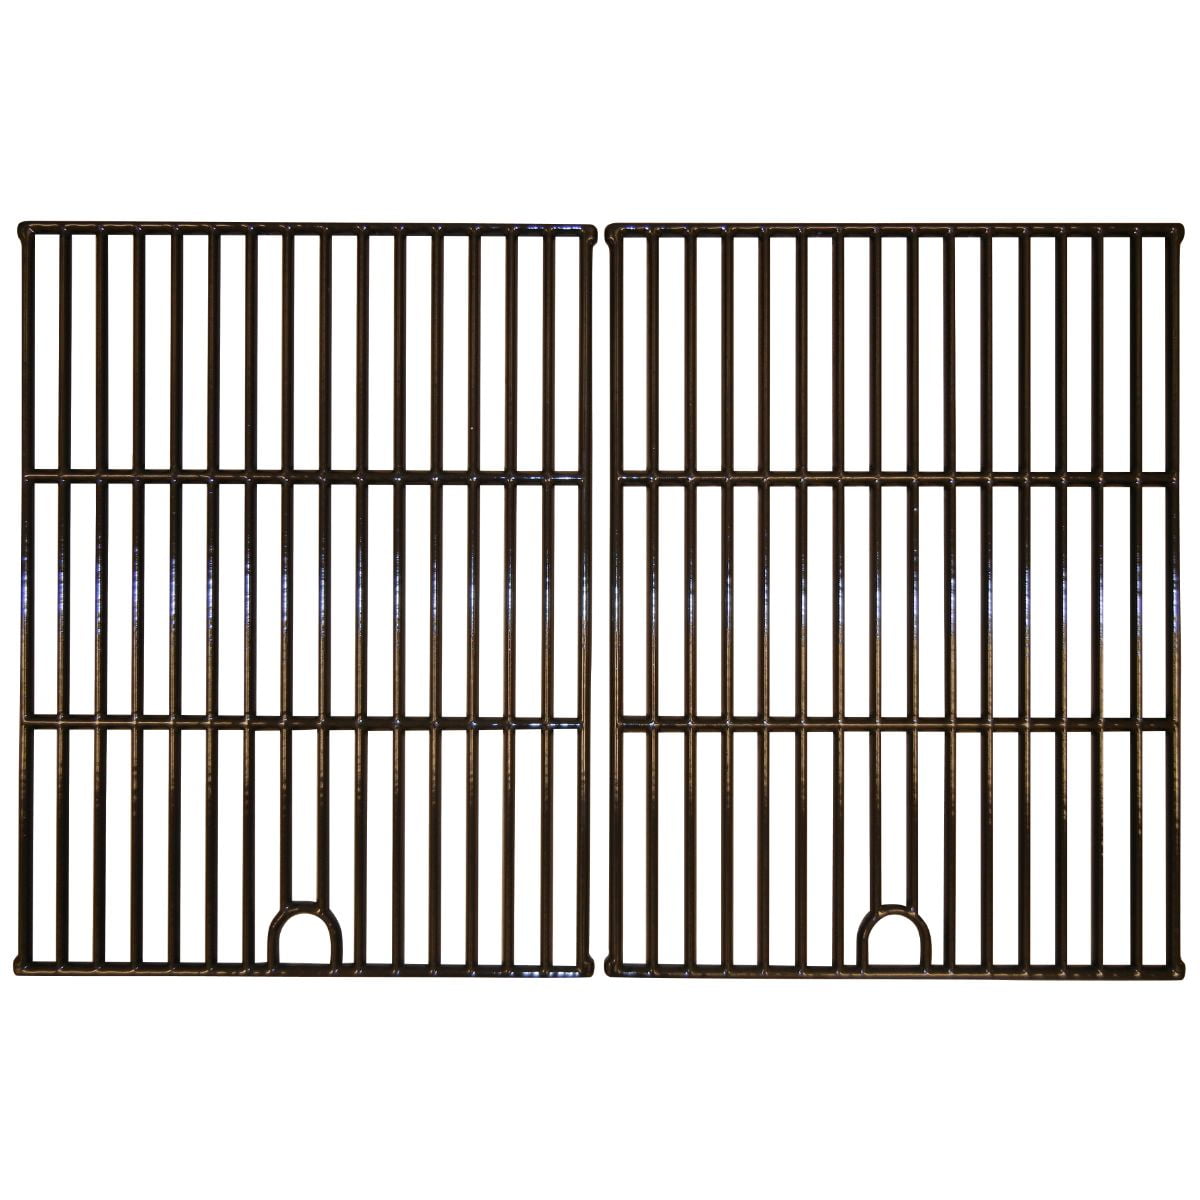 Gloss cast iron cooking grid for Charbroil, Kenmore, Master Forge, Nexgrill, Phoenix-UK, Tera Gear brand gas grills